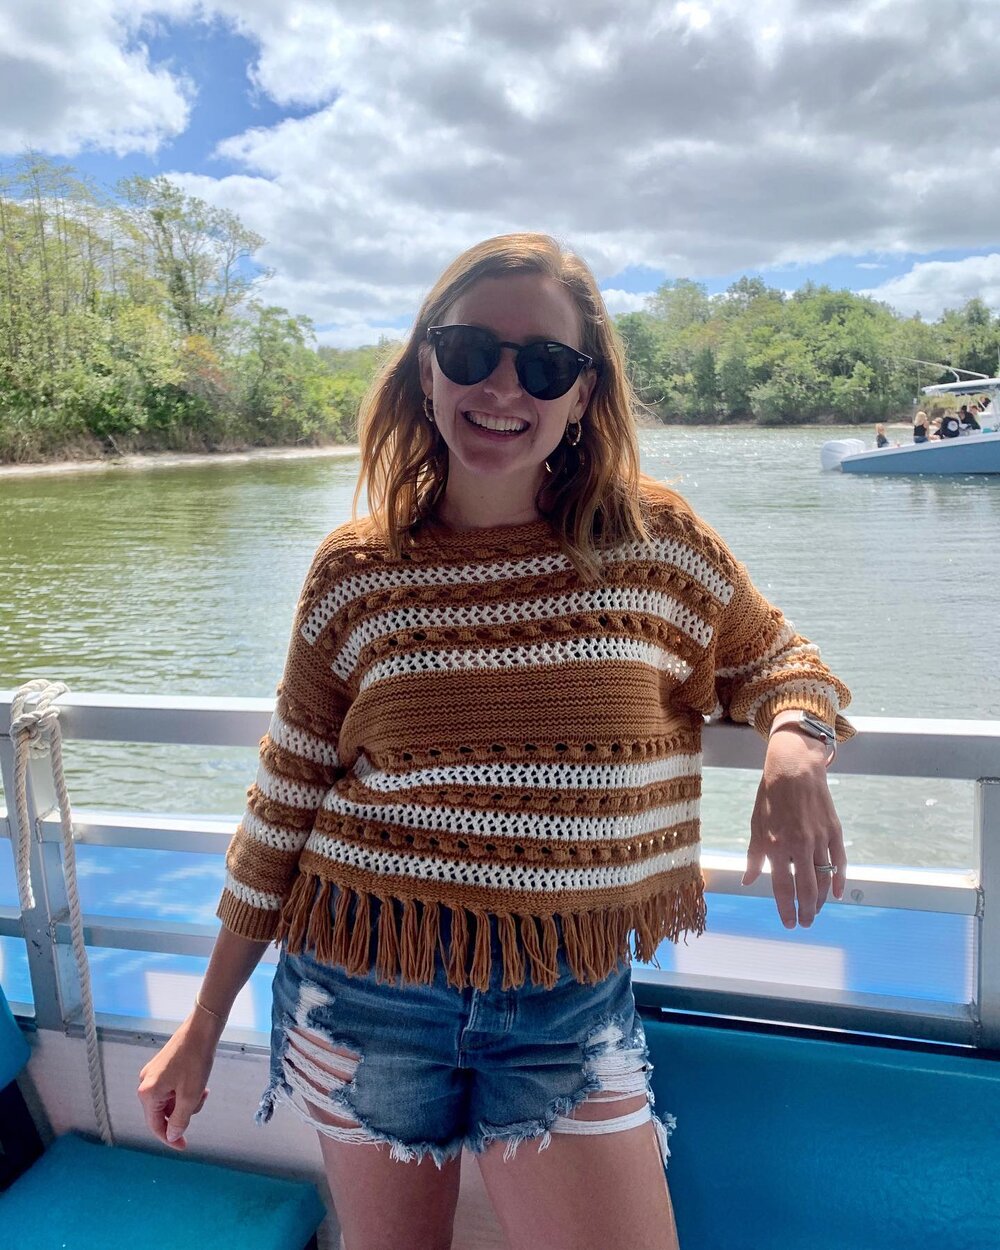 Boat days are still the best, even with a bit of fall chill. Taking full advantage of a shorts + sweater moment 😎☀️